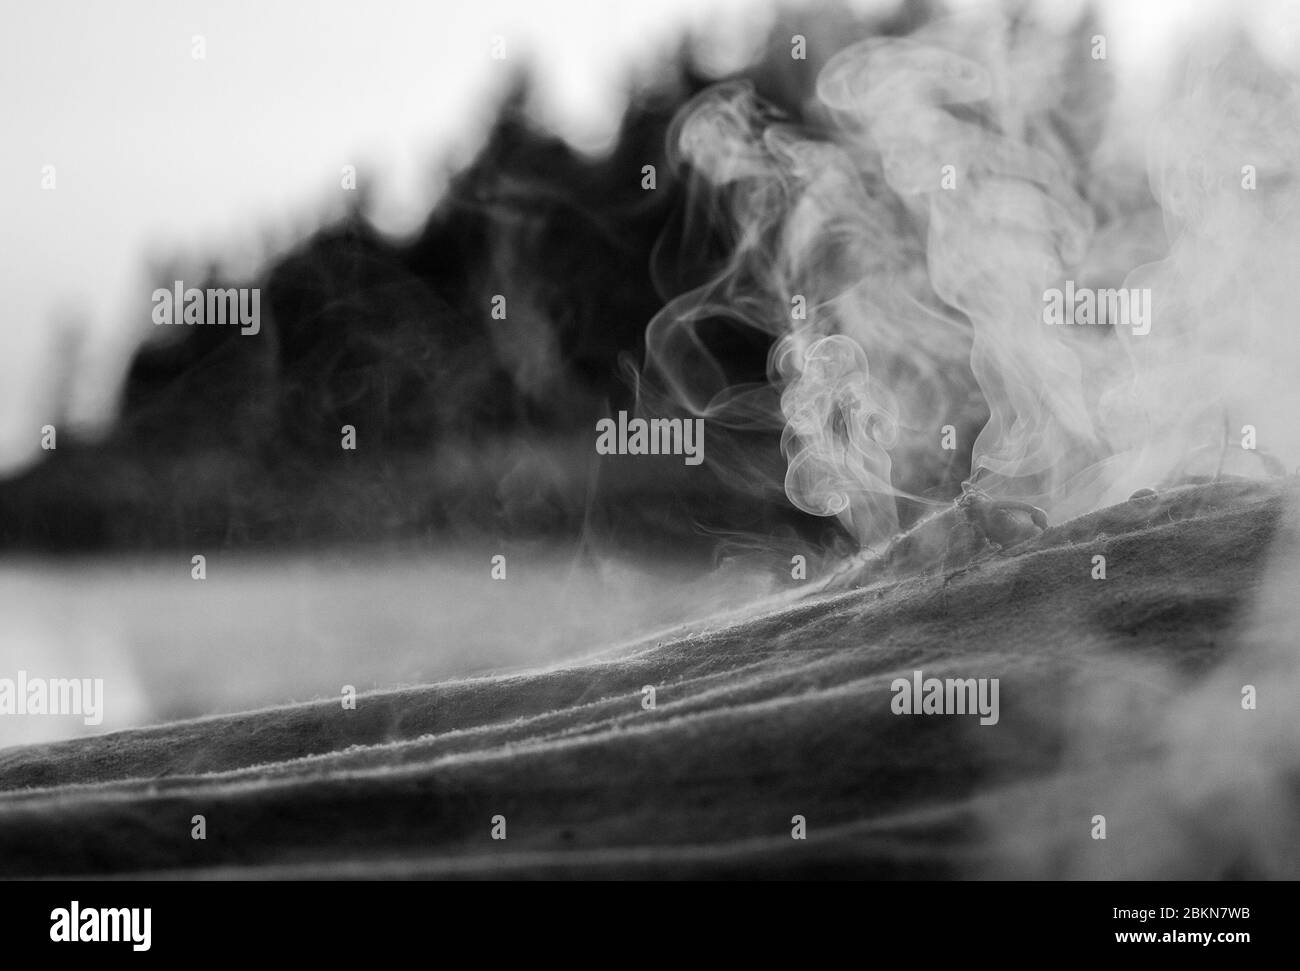 BW image of steam rises from below a fabric tarp where lobsters are steaming at a lobster bake, with a blurred background, in Vinalhaven, Maine, USA Stock Photo